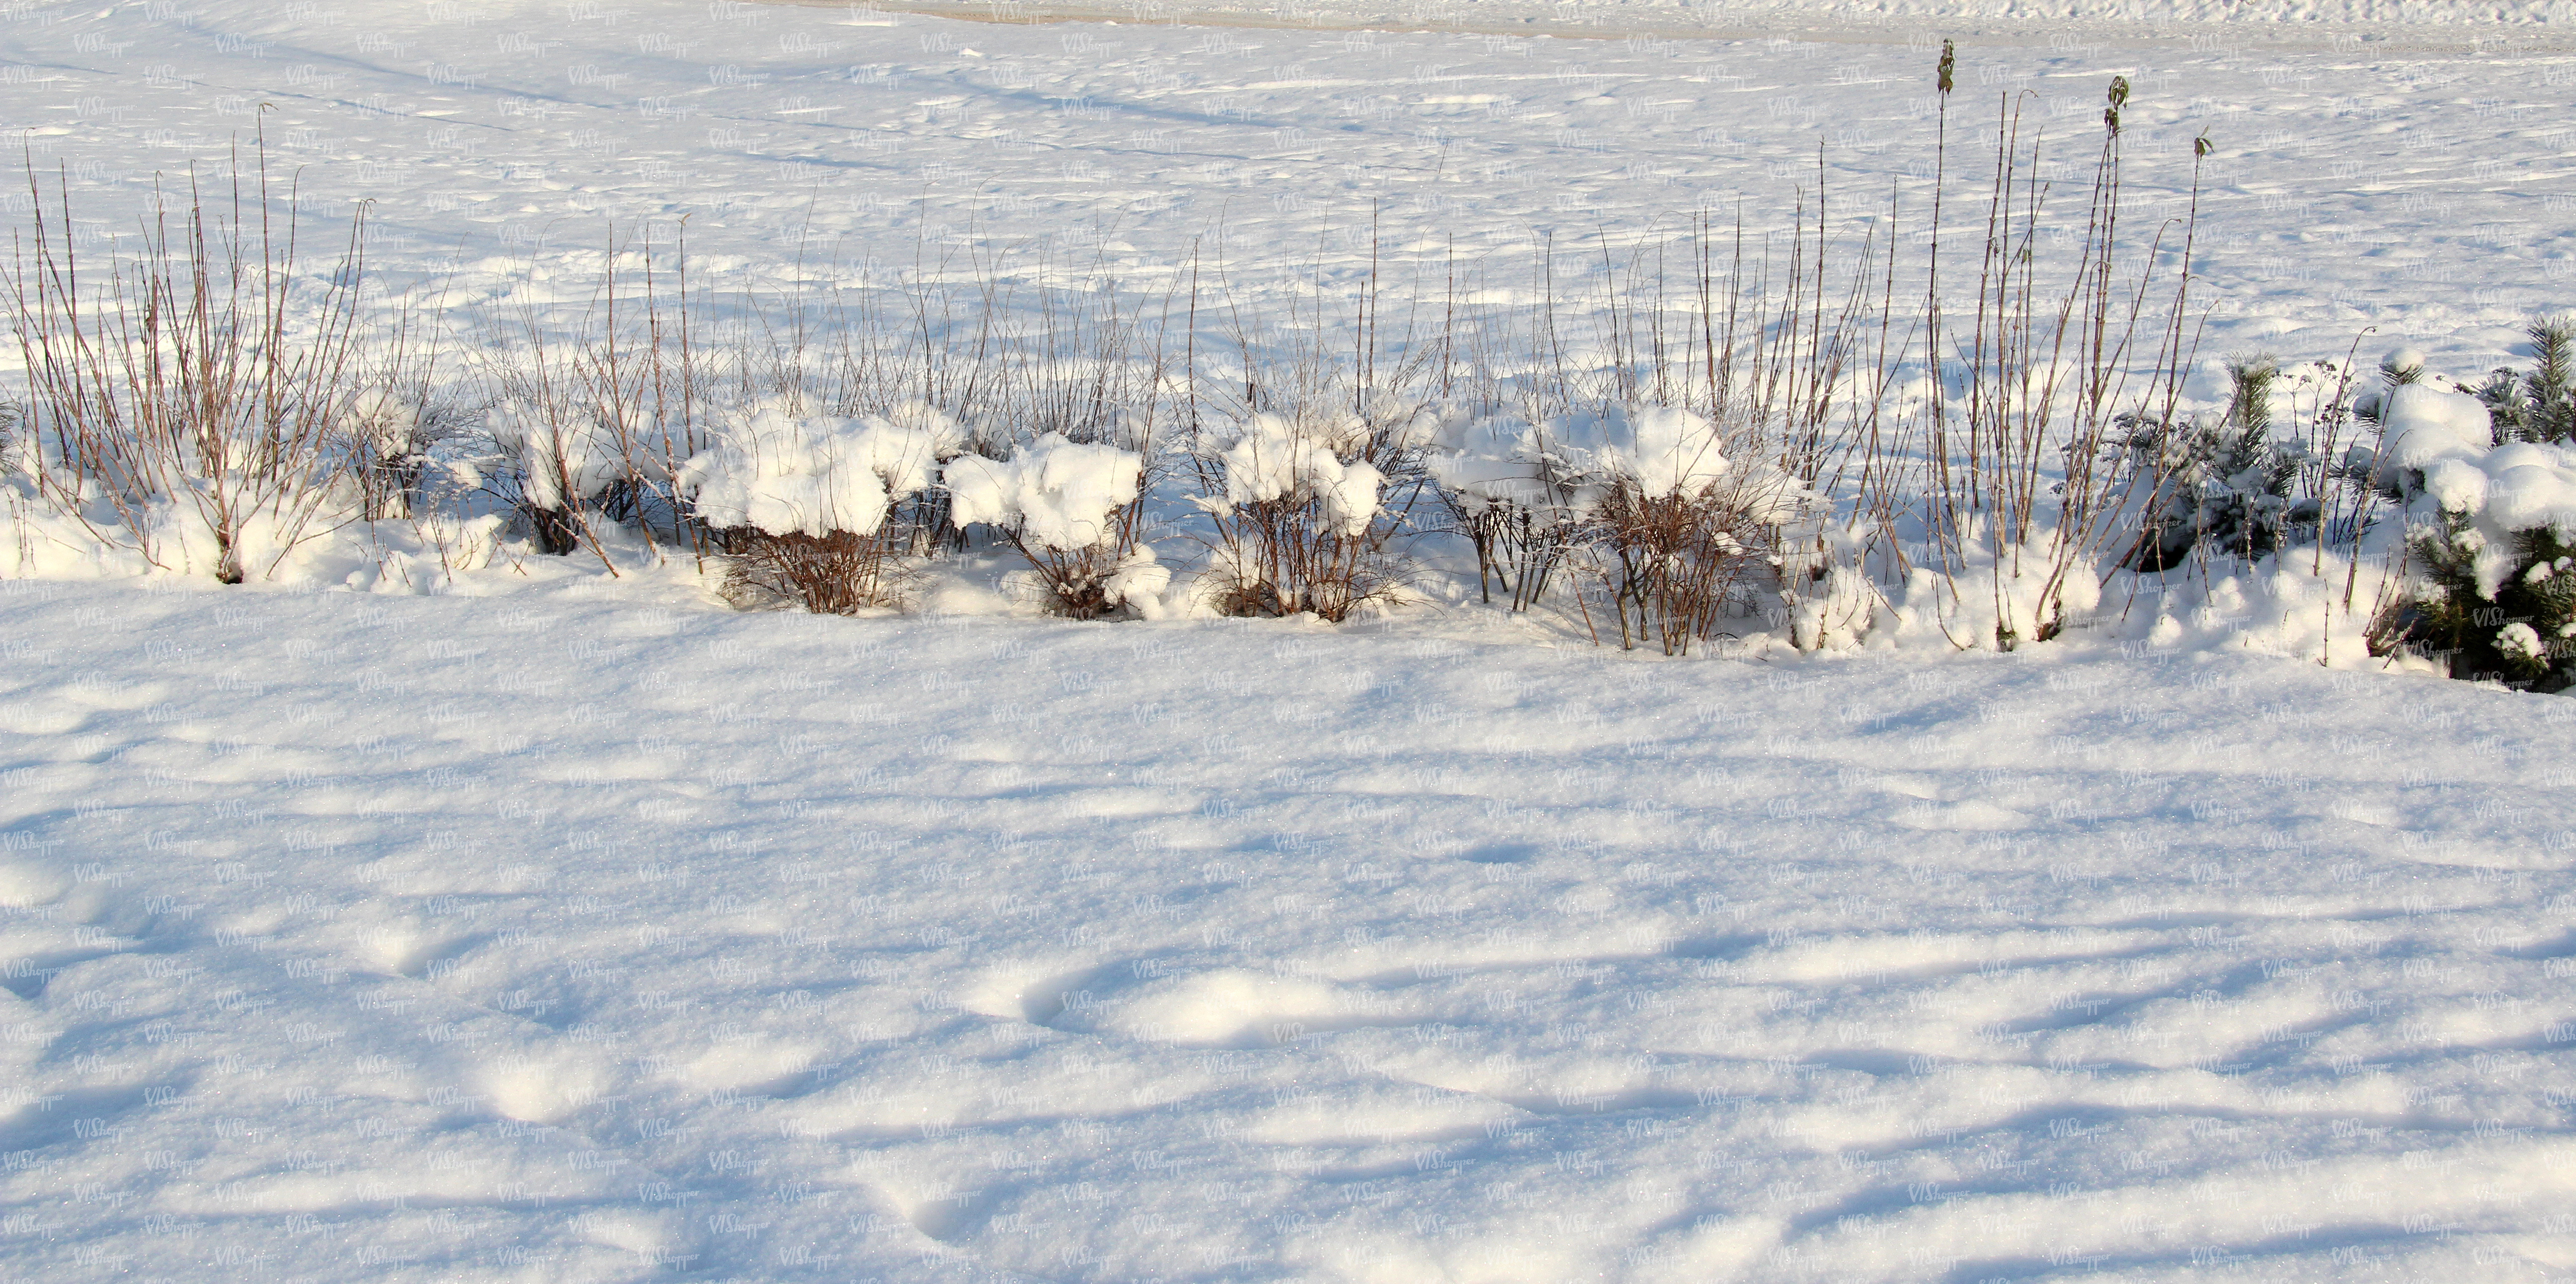 snow-covered ground with some plants - ground textures - VIShopper